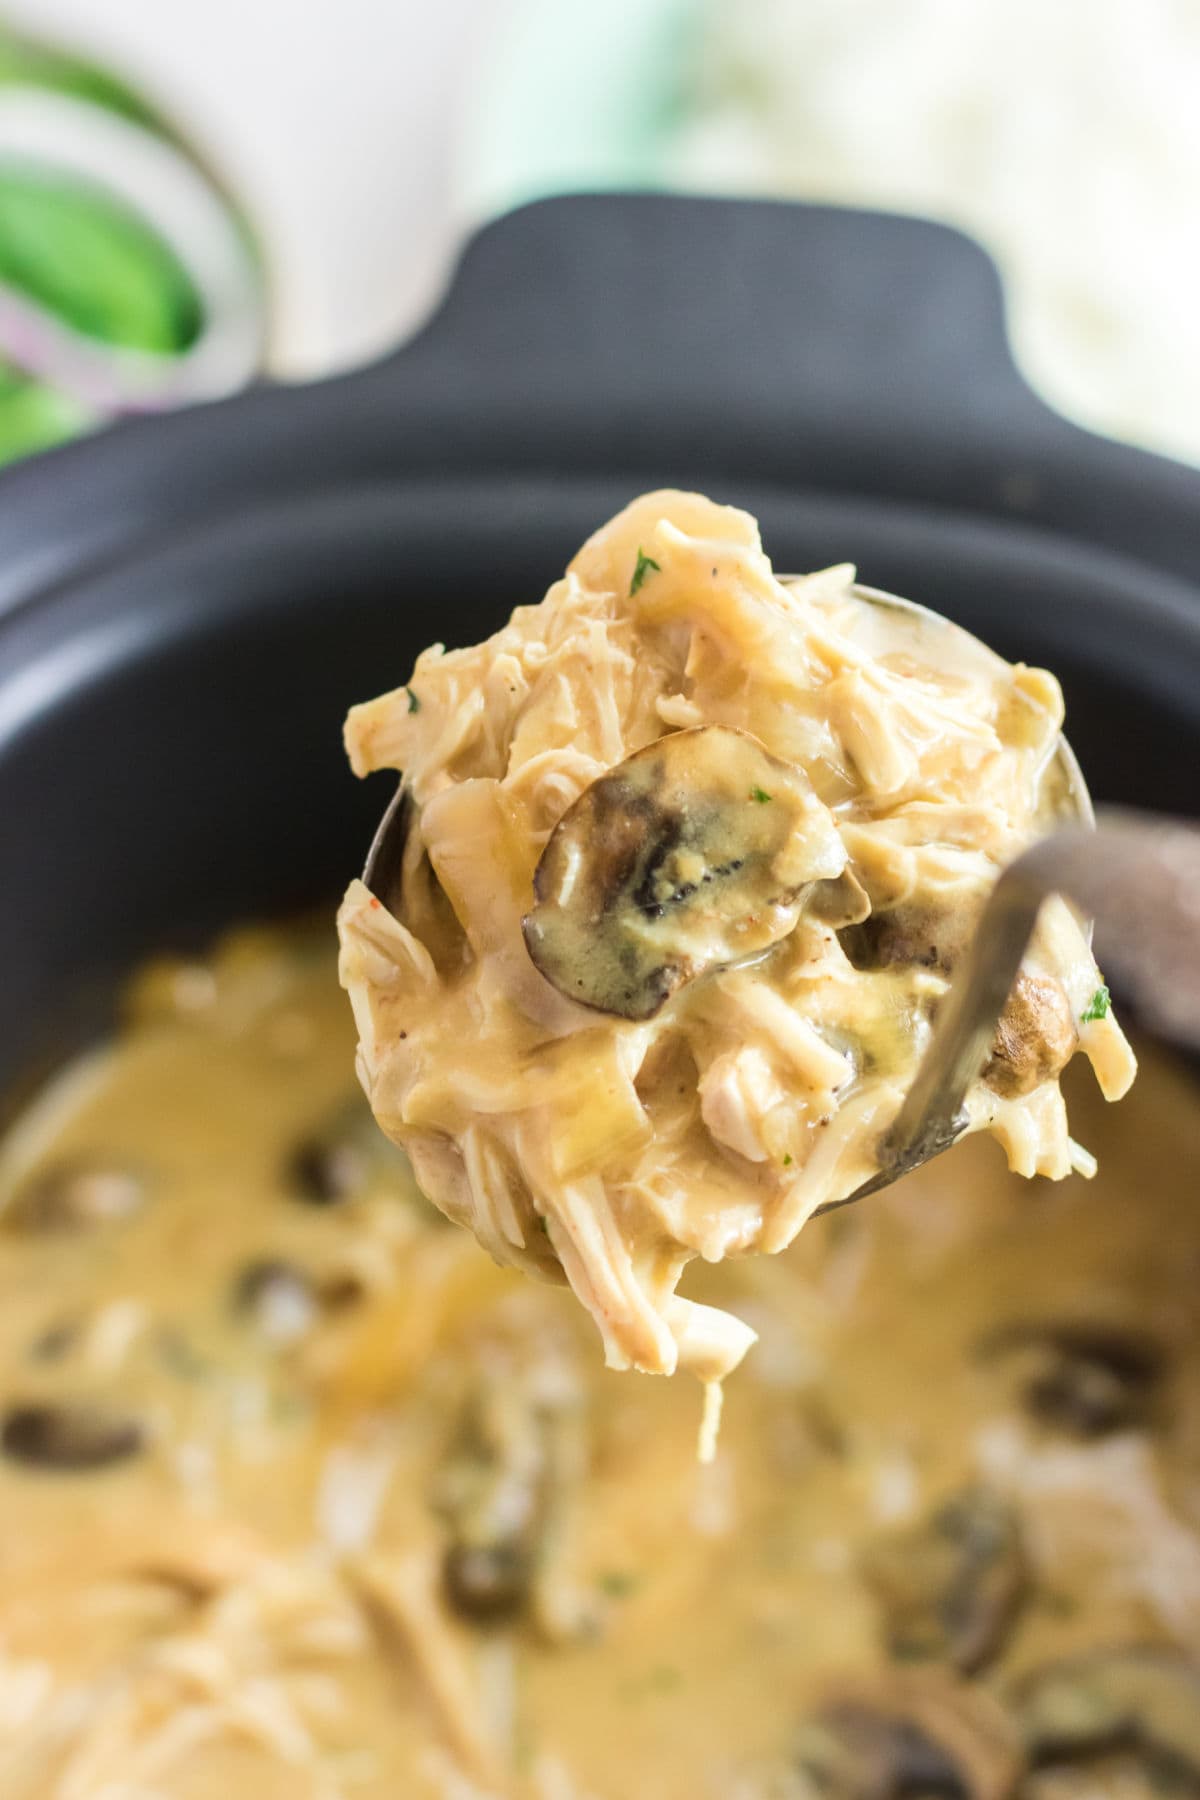 A ladle of creamy chicken being lifted from the crockpot.